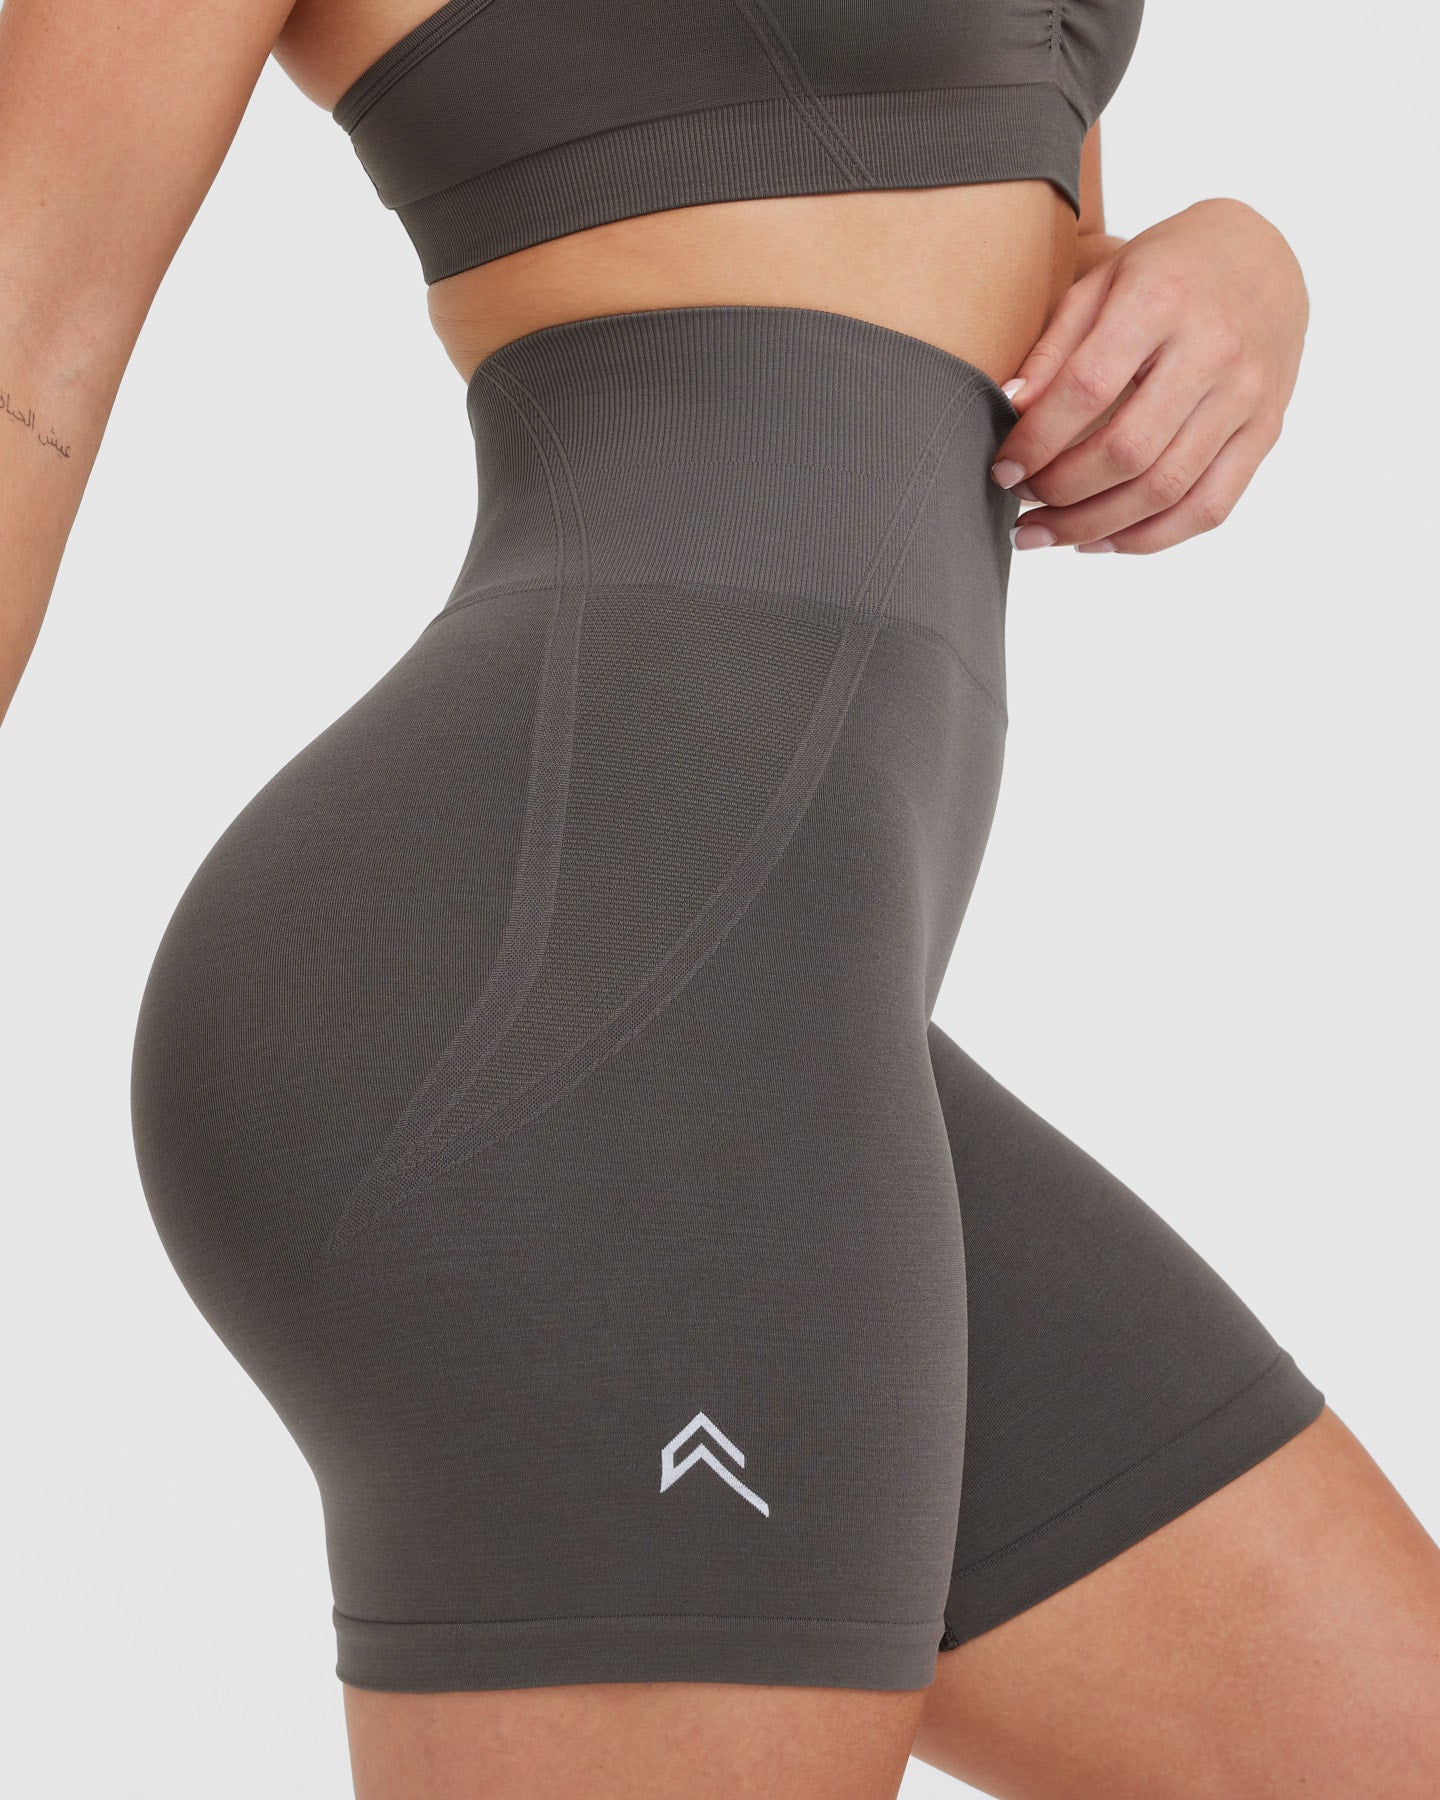 SECOND SKIN SHORTS WOMEN - DEEP TAUPE | Oner Active US